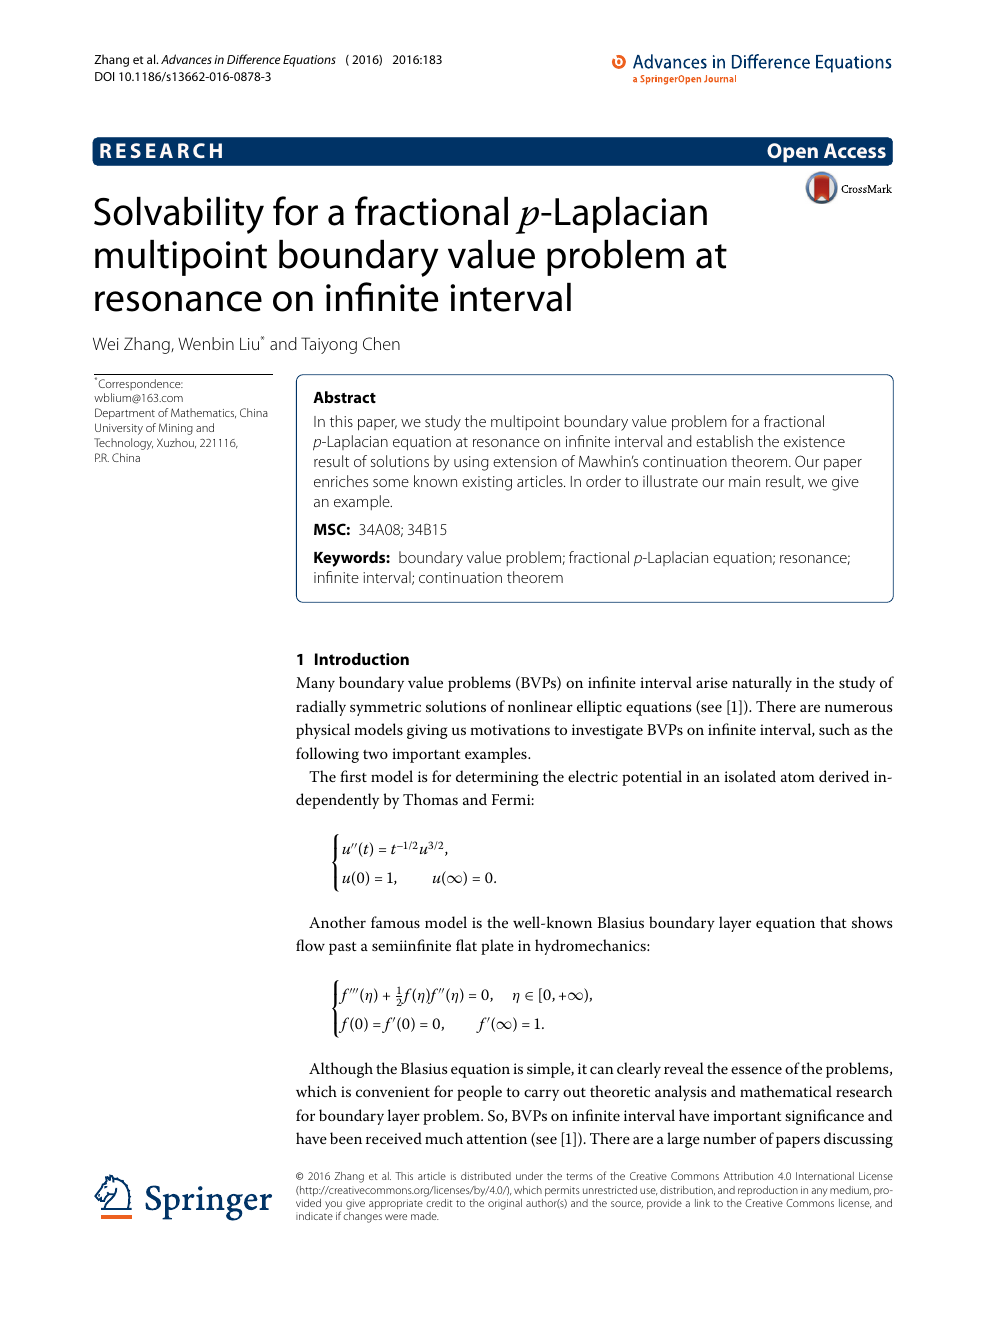 Solvability For A Fractional P Laplacian Multipoint Boundary Value Problem At Resonance On Infinite Interval Topic Of Research Paper In Mathematics Download Scholarly Article Pdf And Read For Free On Cyberleninka Open